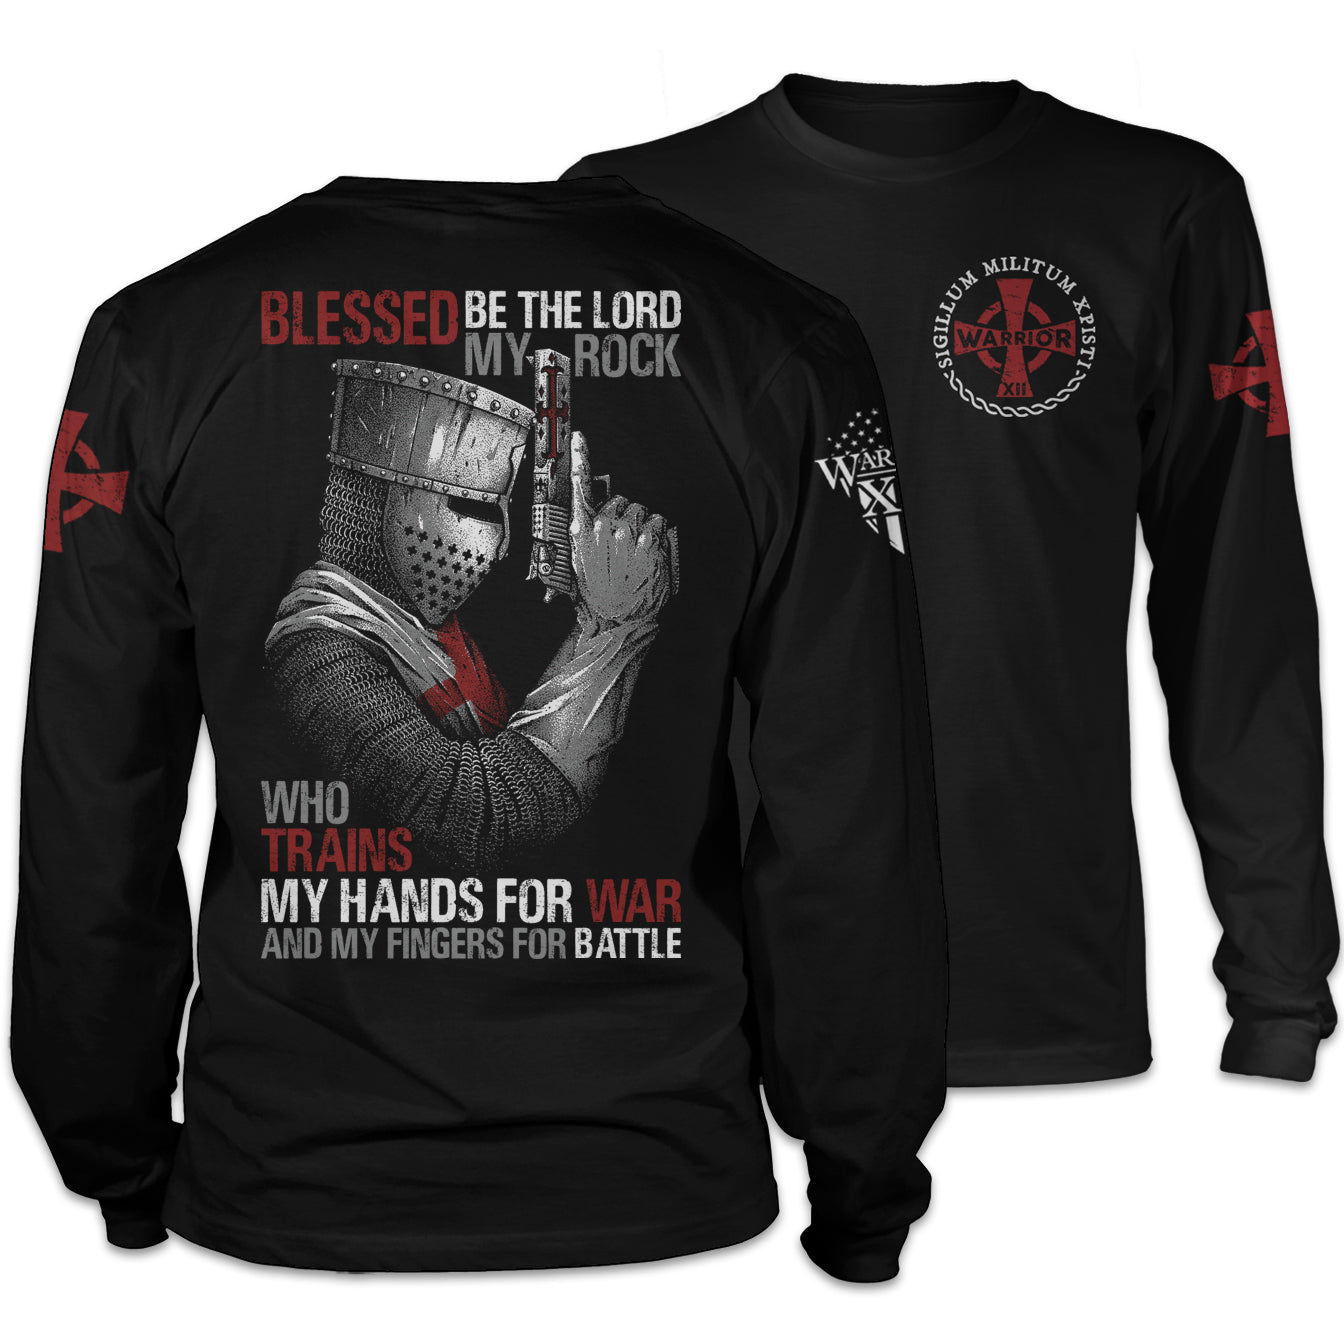 Front & back black long sleeve shirt with the words "Blessed be the lord, my rock, who trains my hands for war and my fingers for battle" with a crusader holding a gun printed on the shirt.